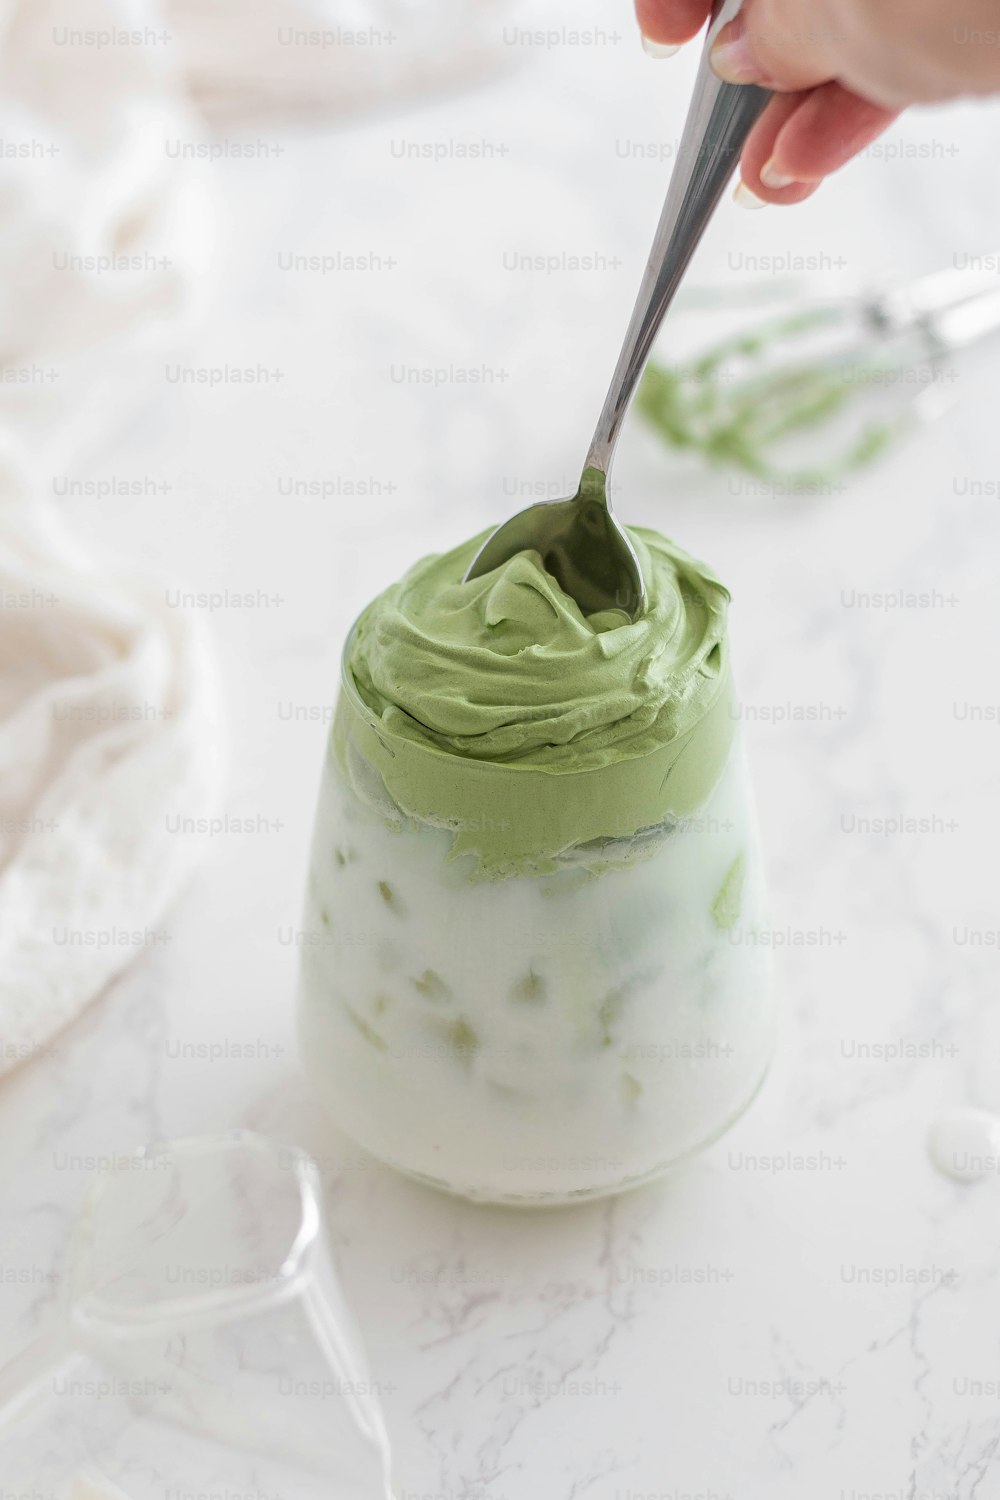 a person holding a spoon over a jar of green cream